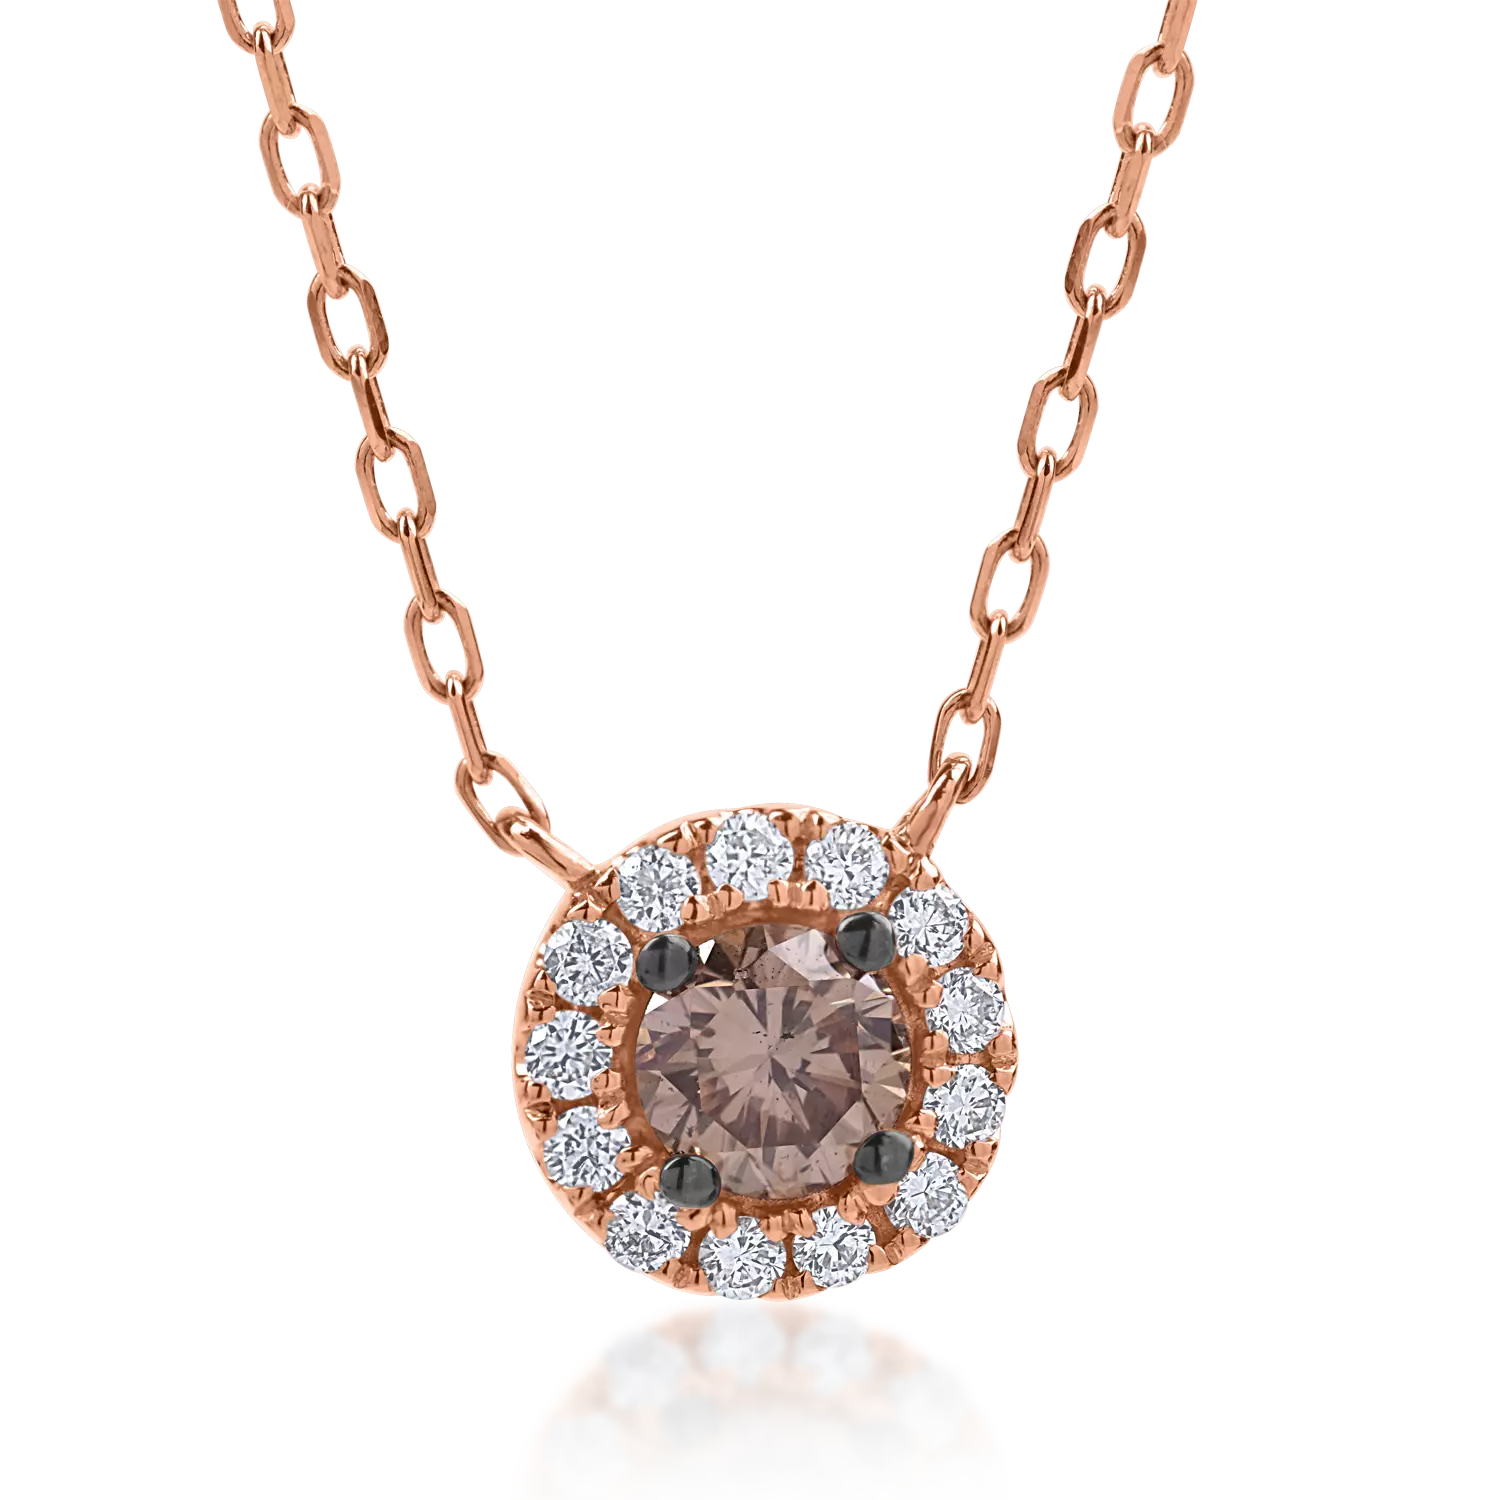 Rose gold pendant necklace with 0.33ct brown diamond and 0.14ct clear diamonds